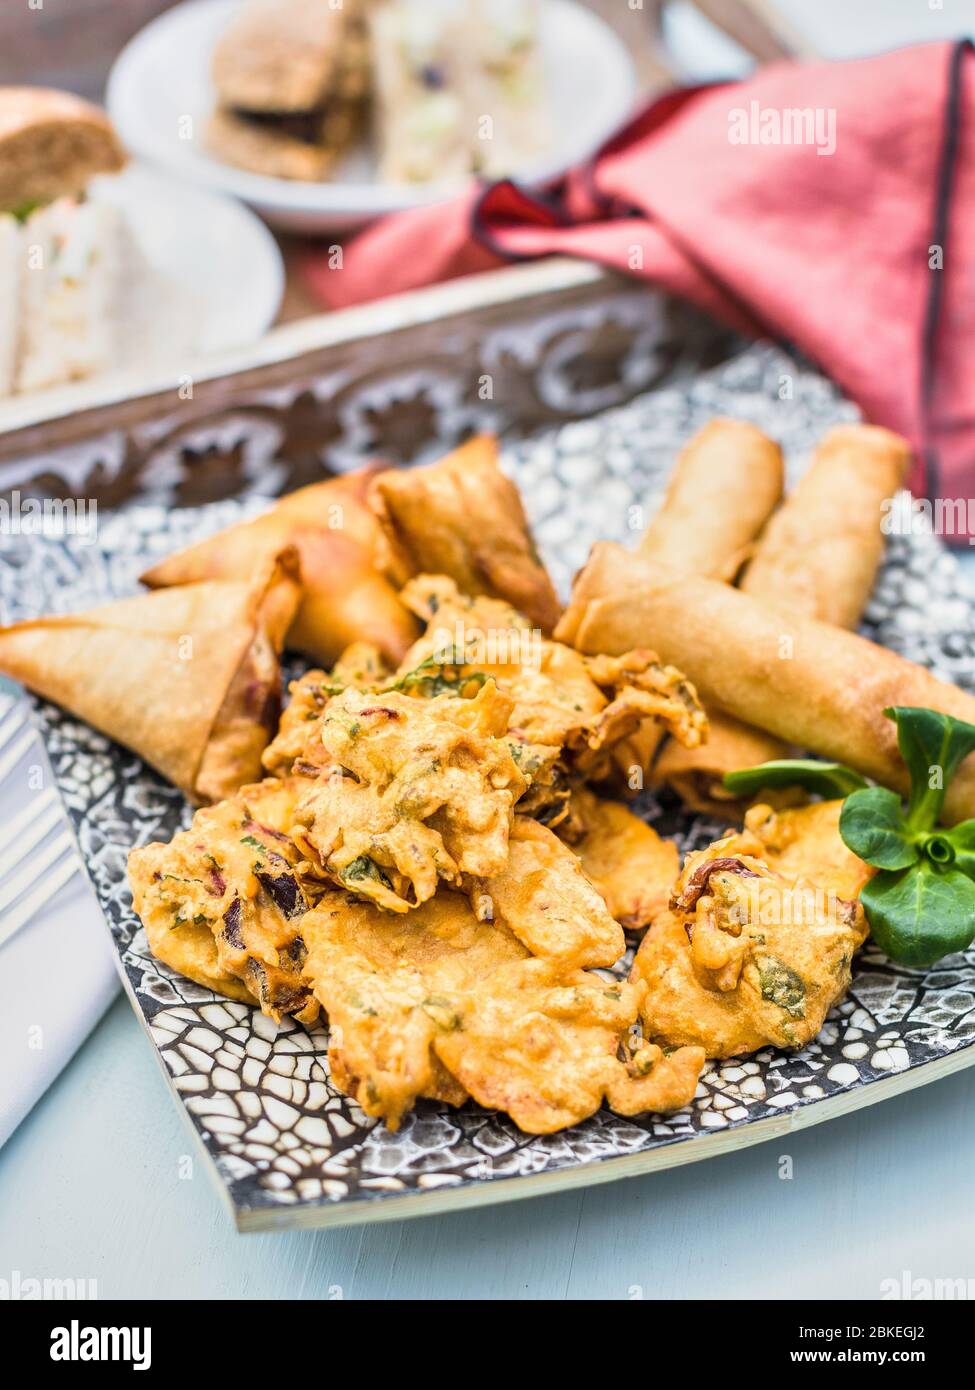 Indian cuisine, Indian food. Pakora Samosa and Spring Rolls traditional Indian fried snacks, appetiser served on a dish. Authentic Asian food. Travel Stock Photo